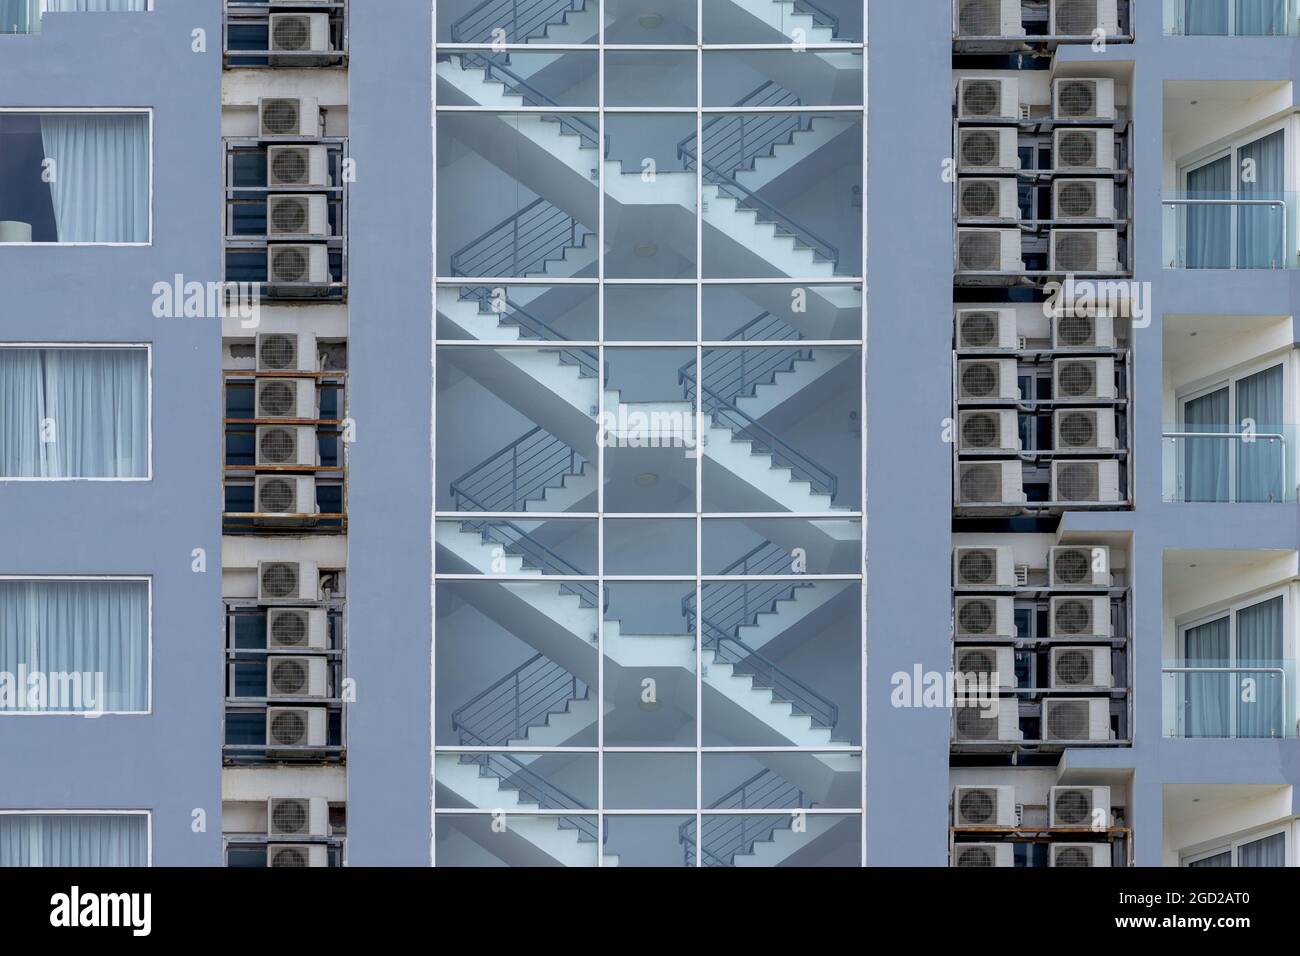 Stairway fire escape is integrated into the interior of high rise residential building Stock Photo